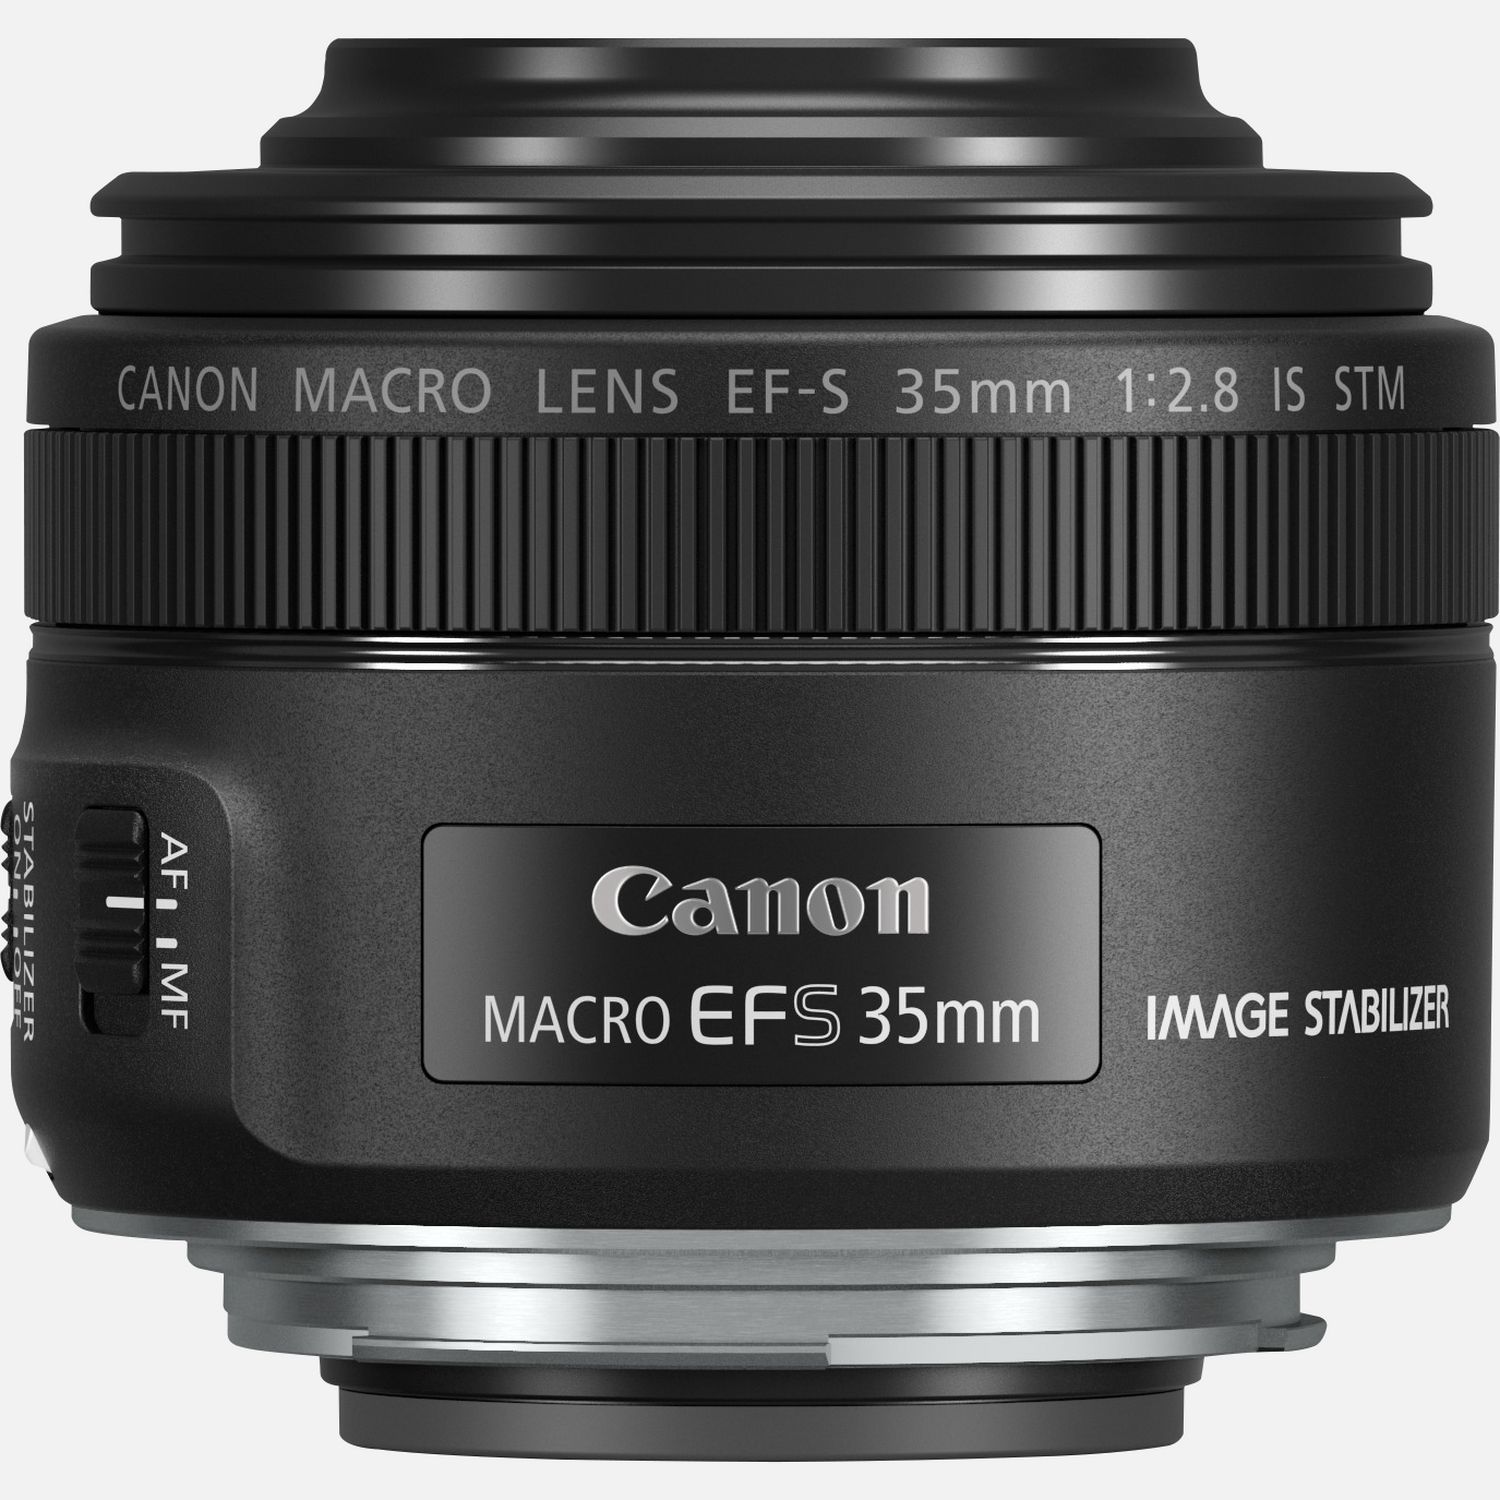 Buy Canon Lens Store OY — in STM 35mm f/2.8 Discontinued EF-S Canon IS Macro